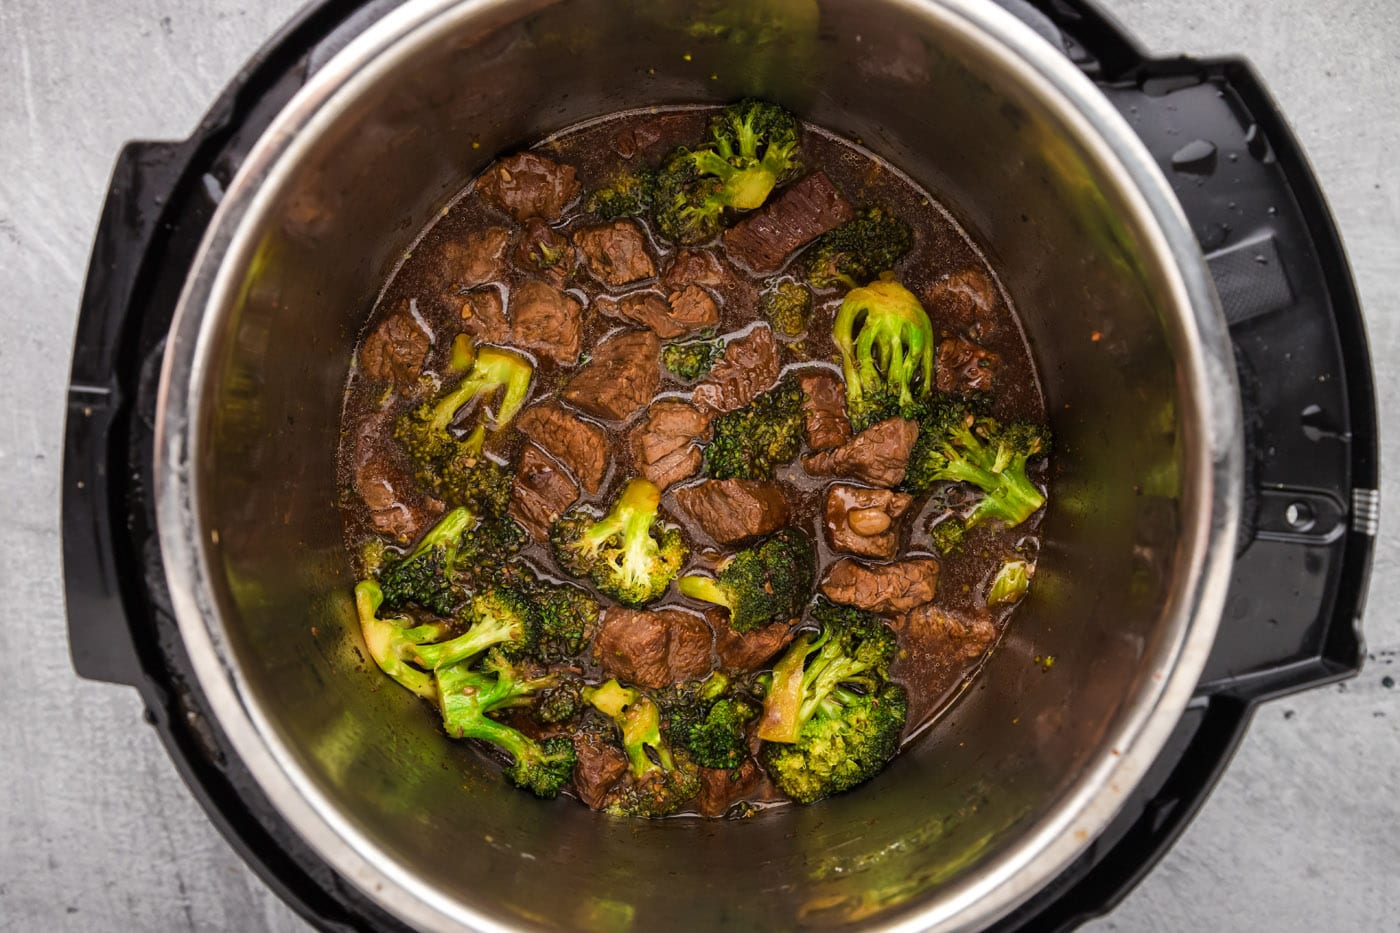 finished cooked beef and broccoli in the instant pot